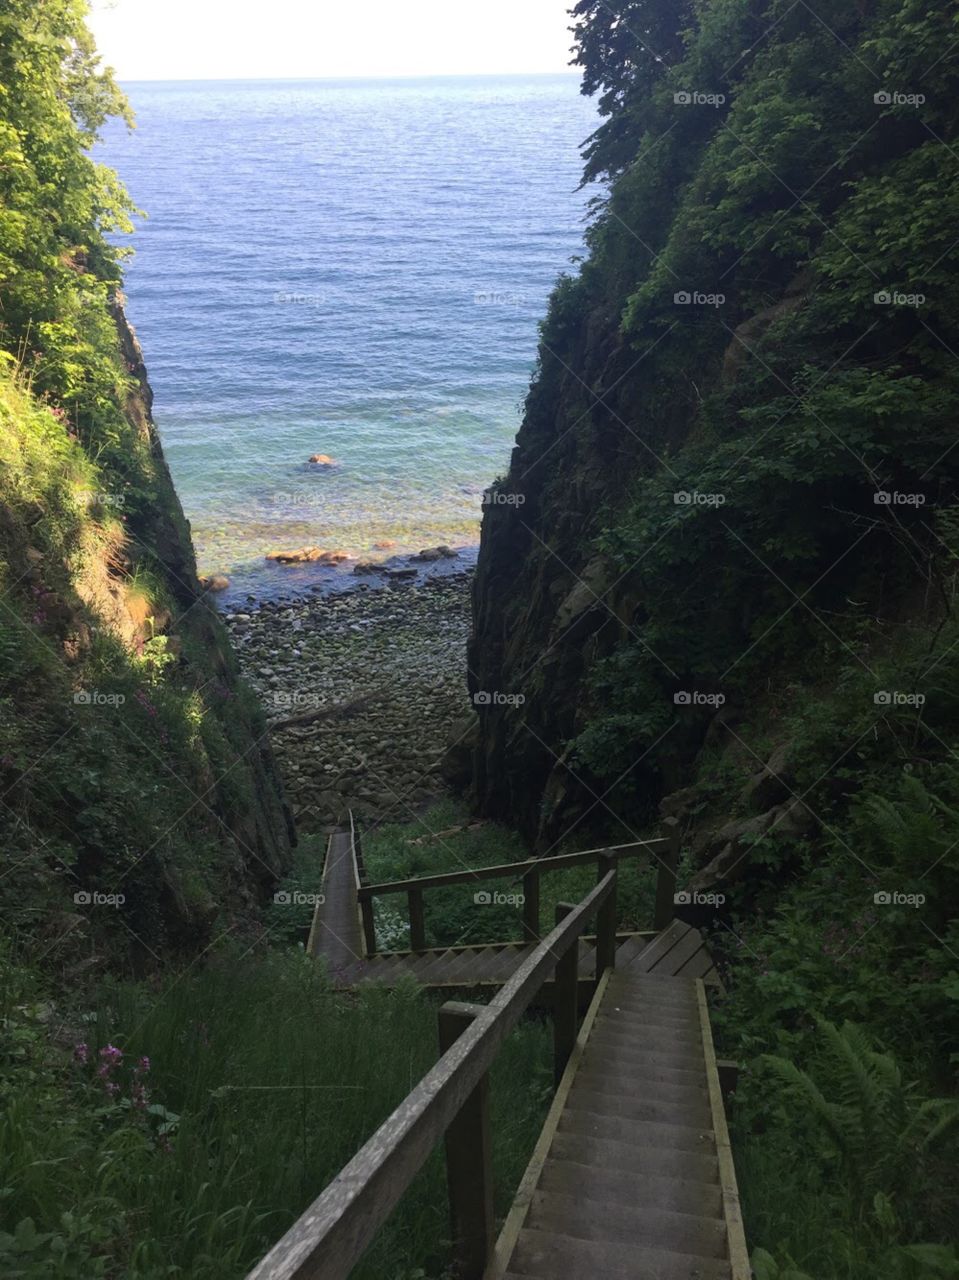 Stairway leads down the greenery covered cliff to a hidden rocky beach. Blue water laps at the shore. 